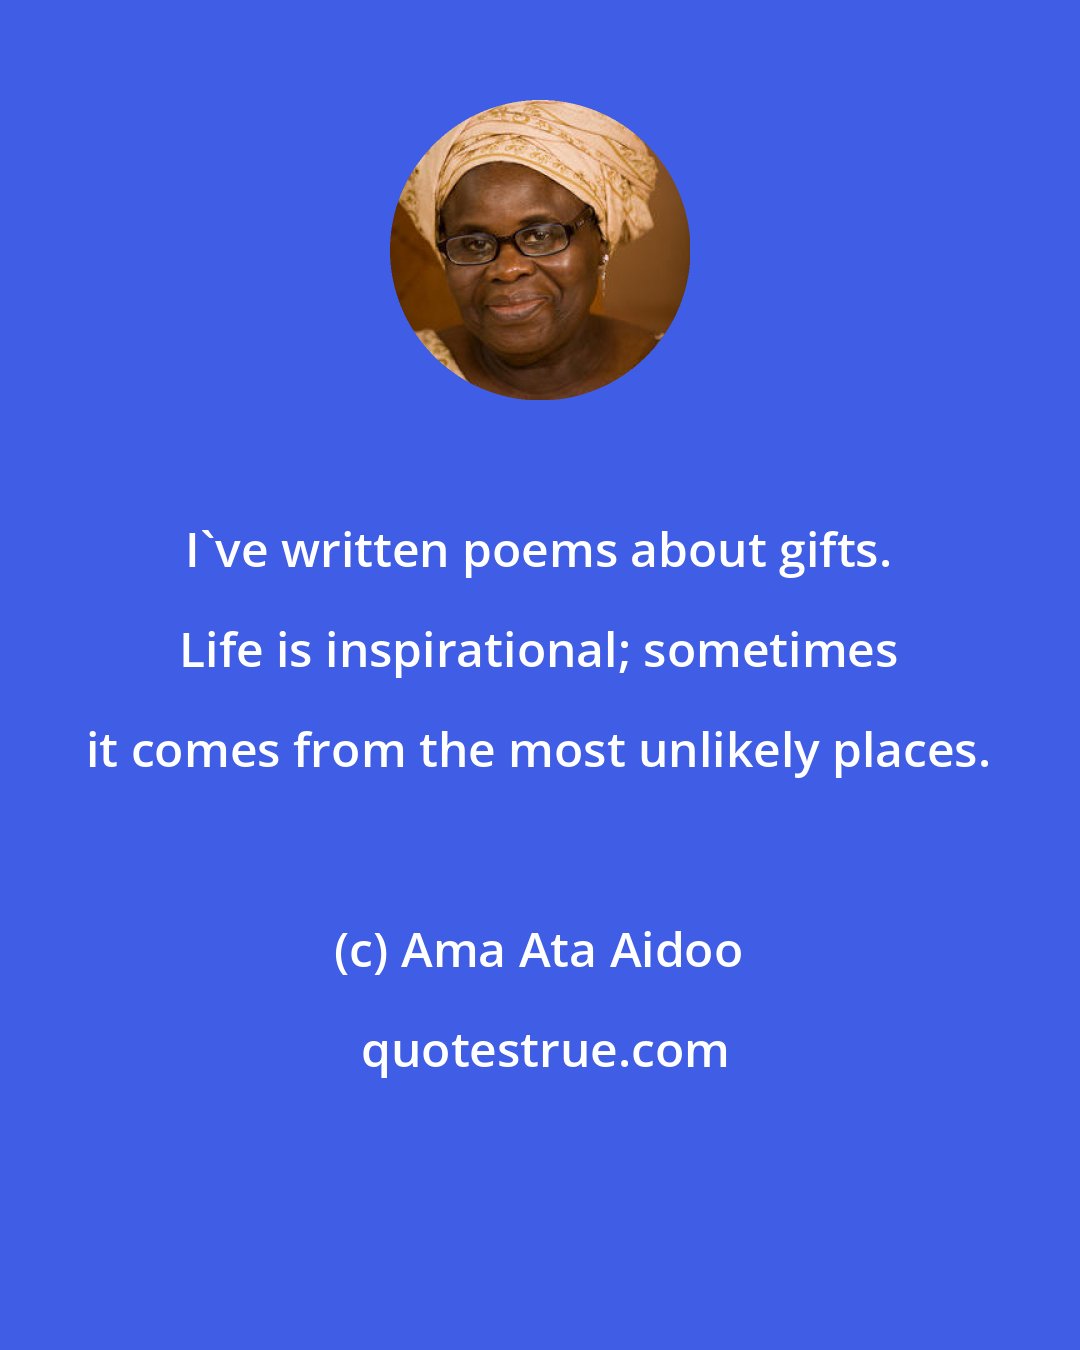 Ama Ata Aidoo: I've written poems about gifts. Life is inspirational; sometimes it comes from the most unlikely places.